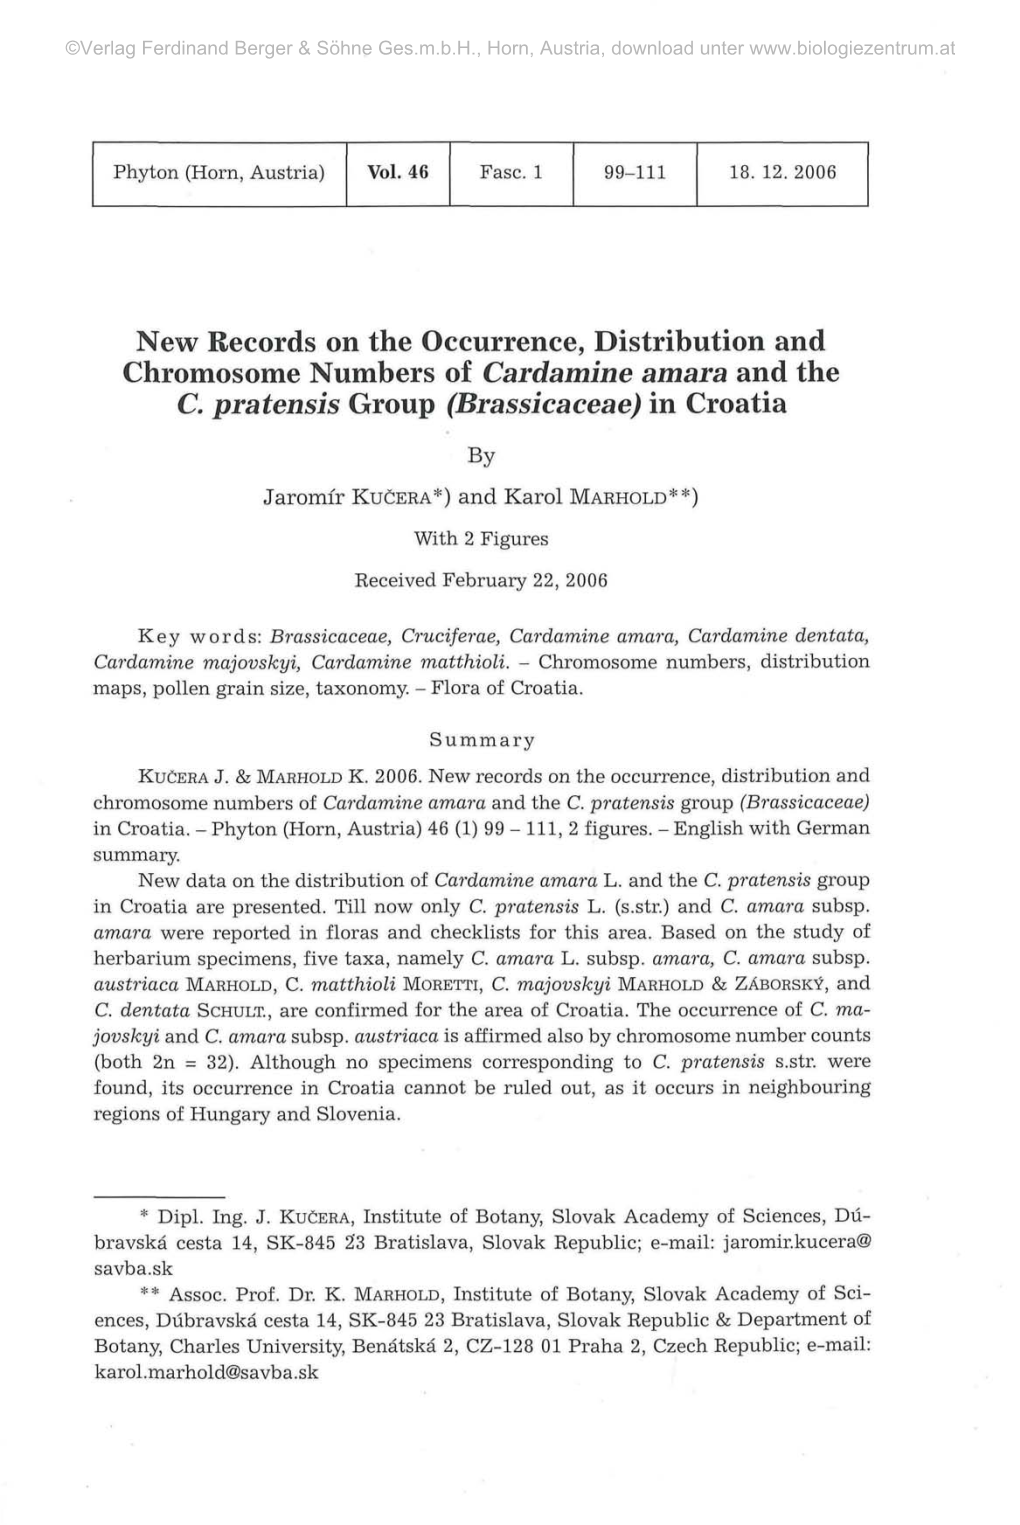 New Records on the Occurrence, Distribution and Chromosome Numbers of Cardamine Amara and the C